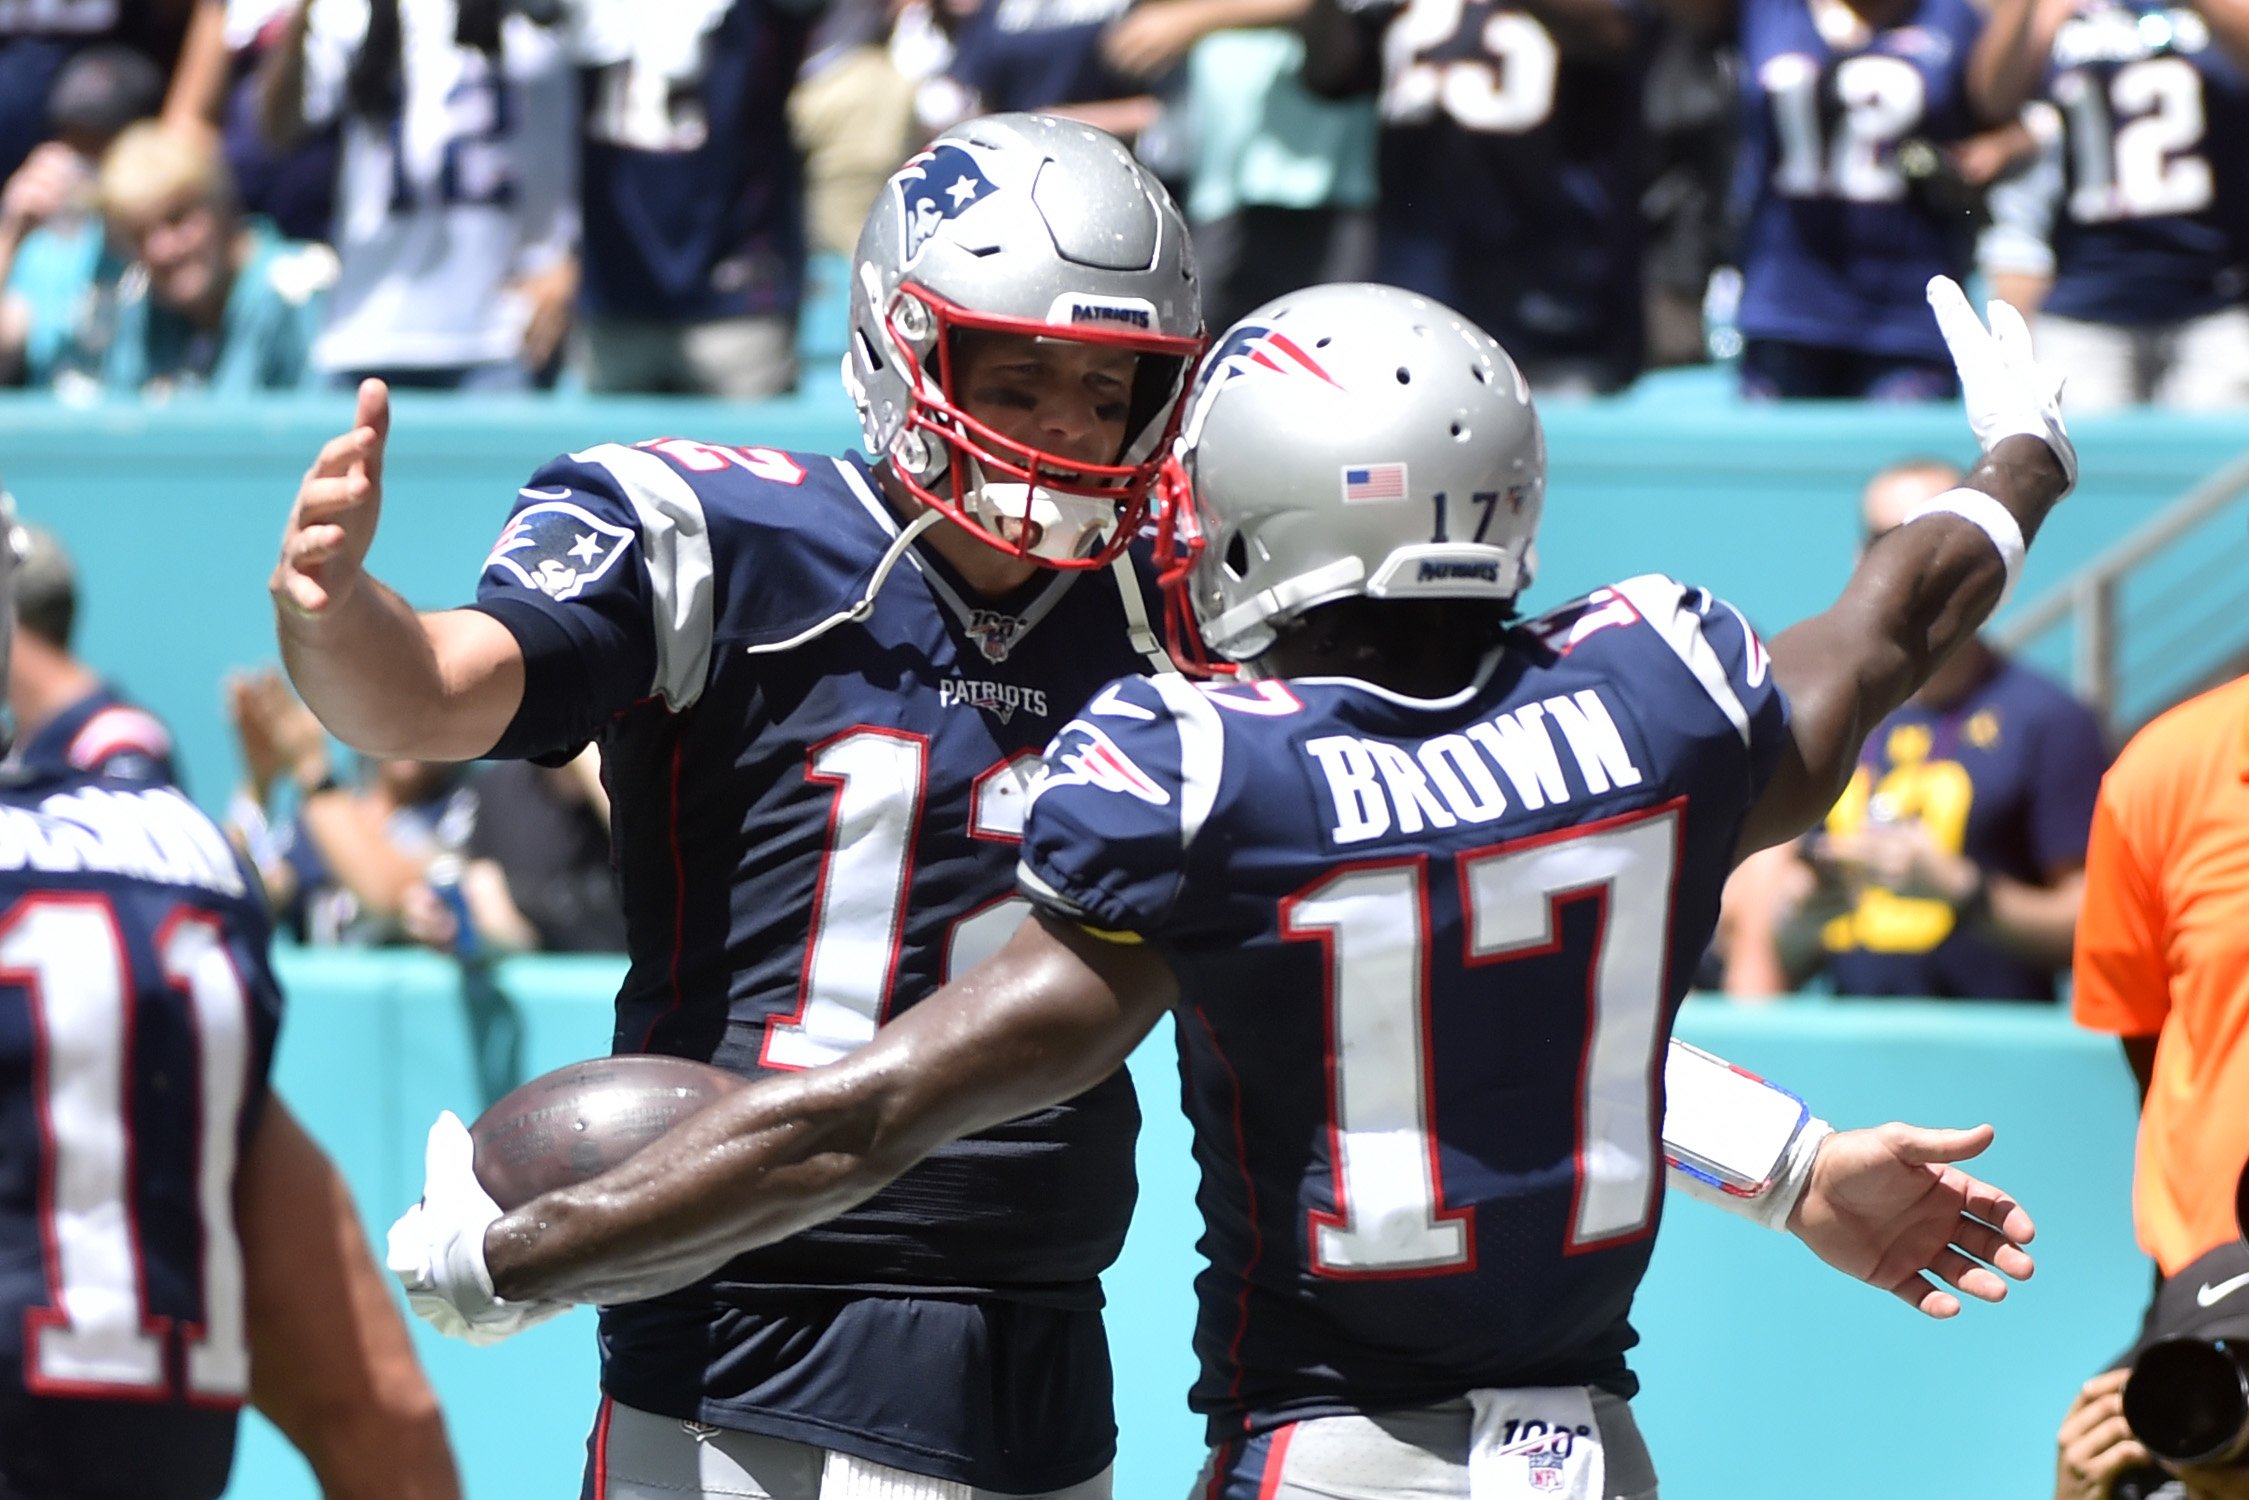 Antonio Brown #17 of the New England Patriots celebrates with Tom Brady #12 after catching a touchdown in the second quarter of the game against the Miami Dolphins at Hard Rock Stadium on September 15, 2019 in Miami, Florida. | Source: Getty Images